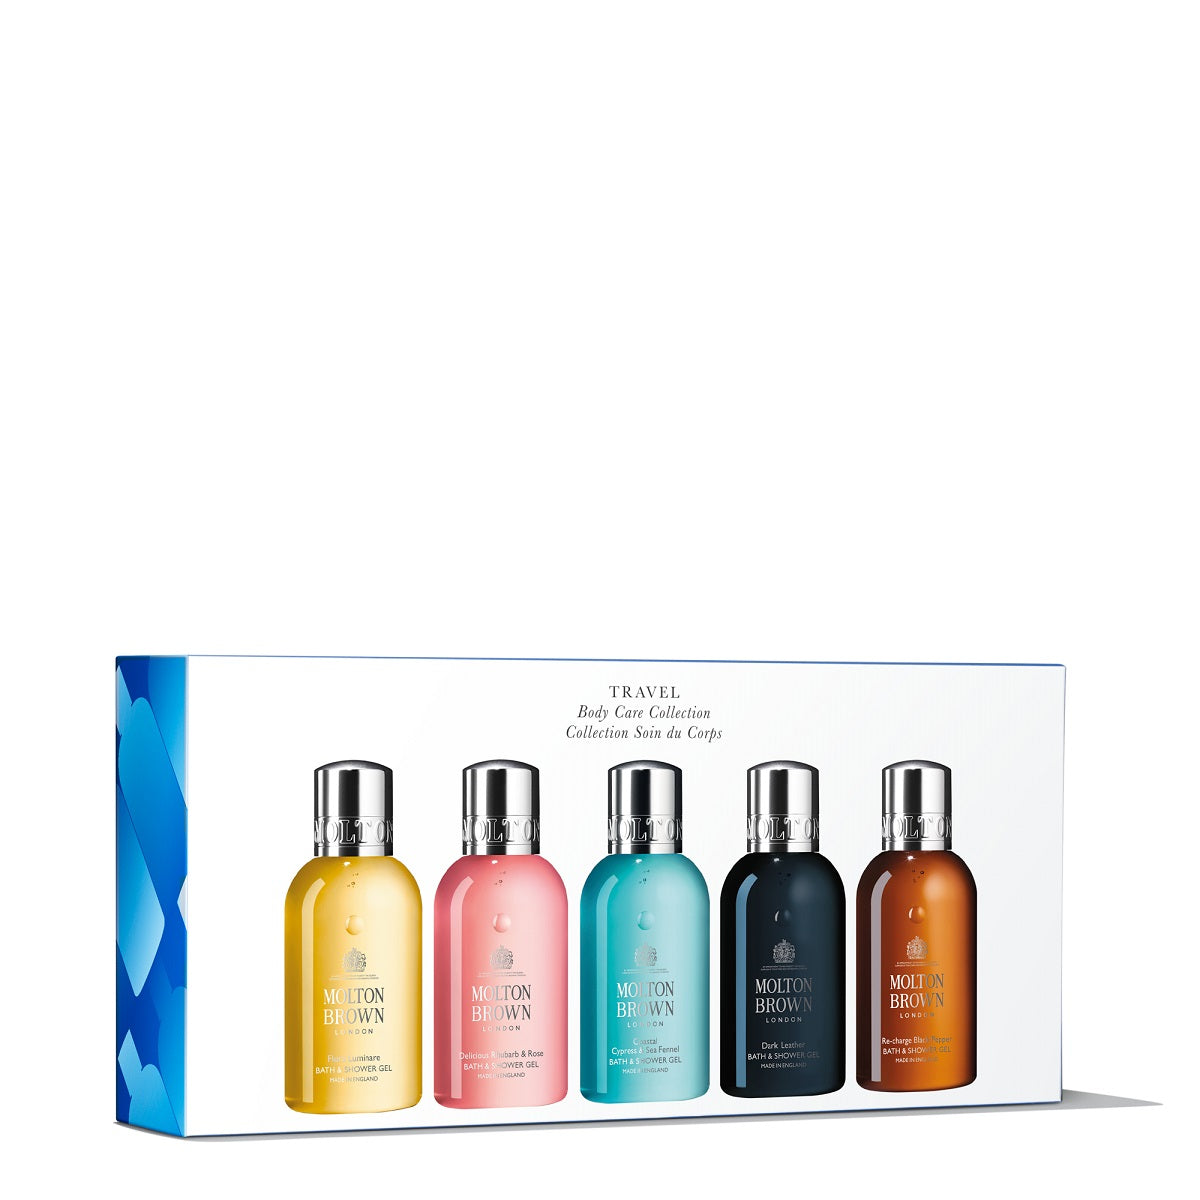 Molton Brown Travel Body Care Gift Set